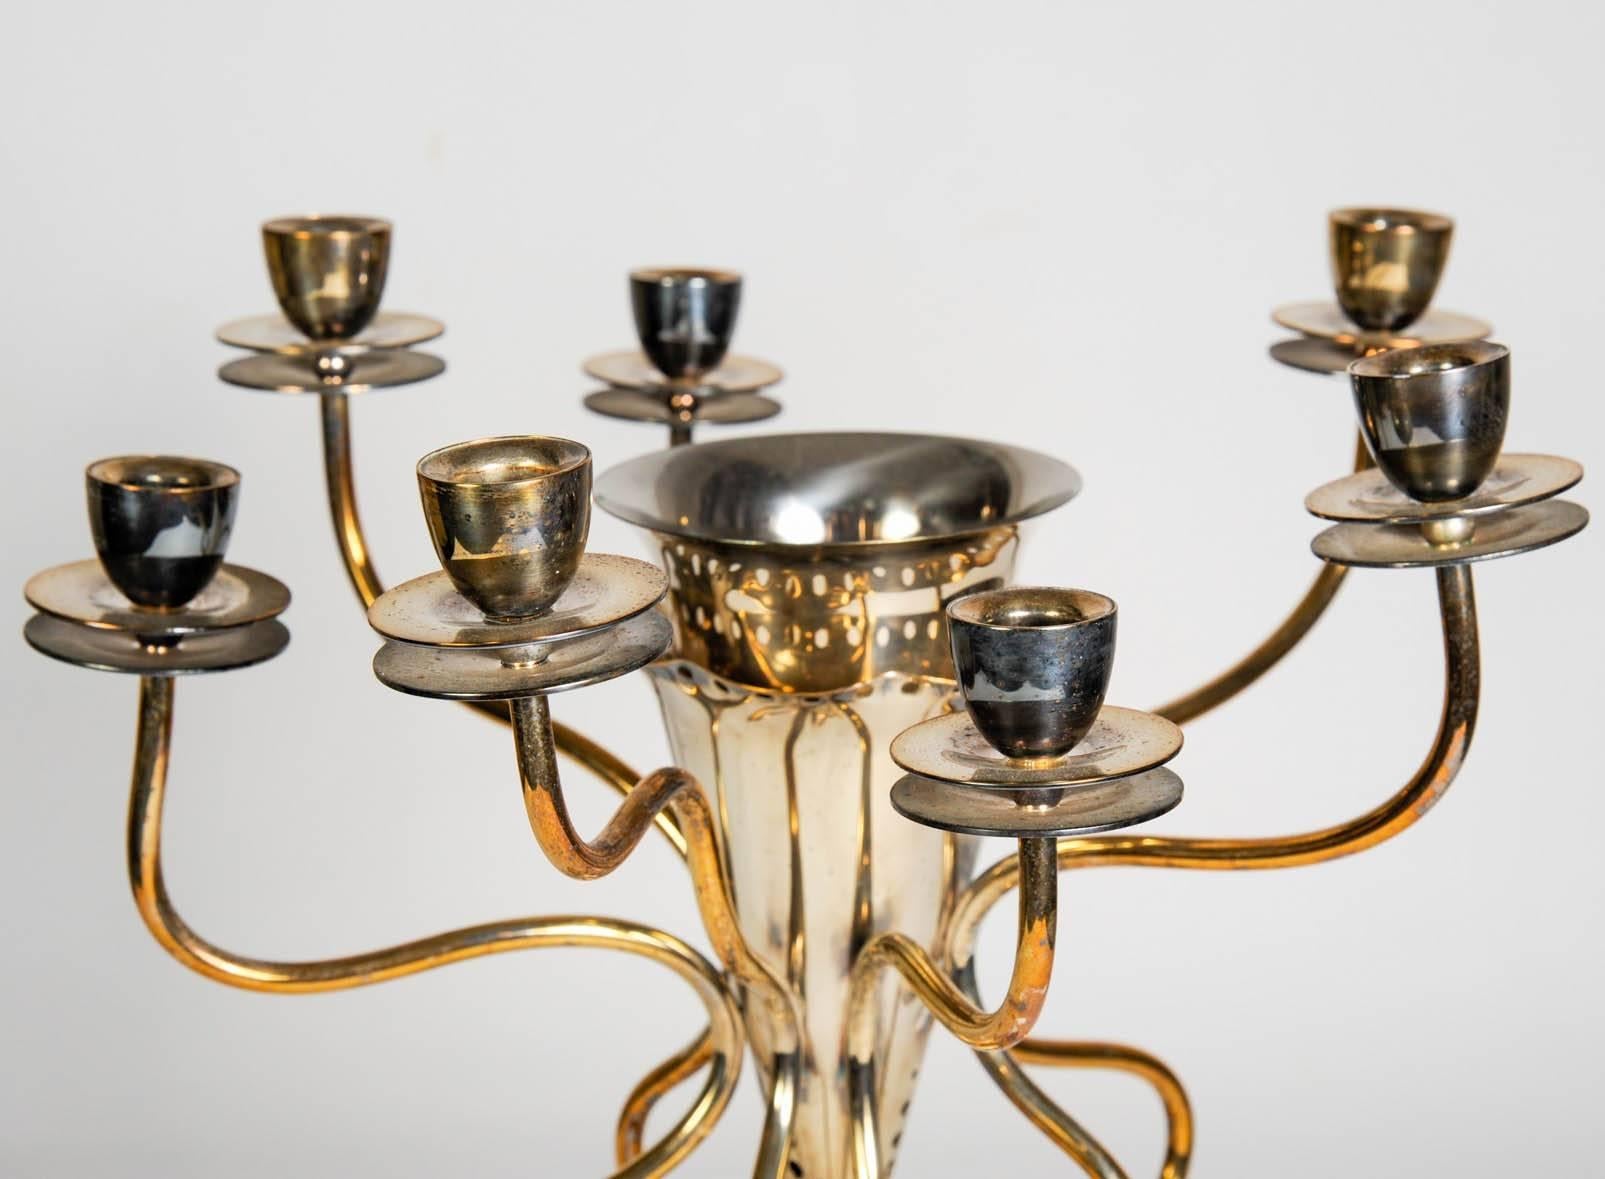 Silver plated candleholder with incorpored vase designed 1980s 
by Borek Sipek.
Price for 1 
Possibility of a second one to make a pair